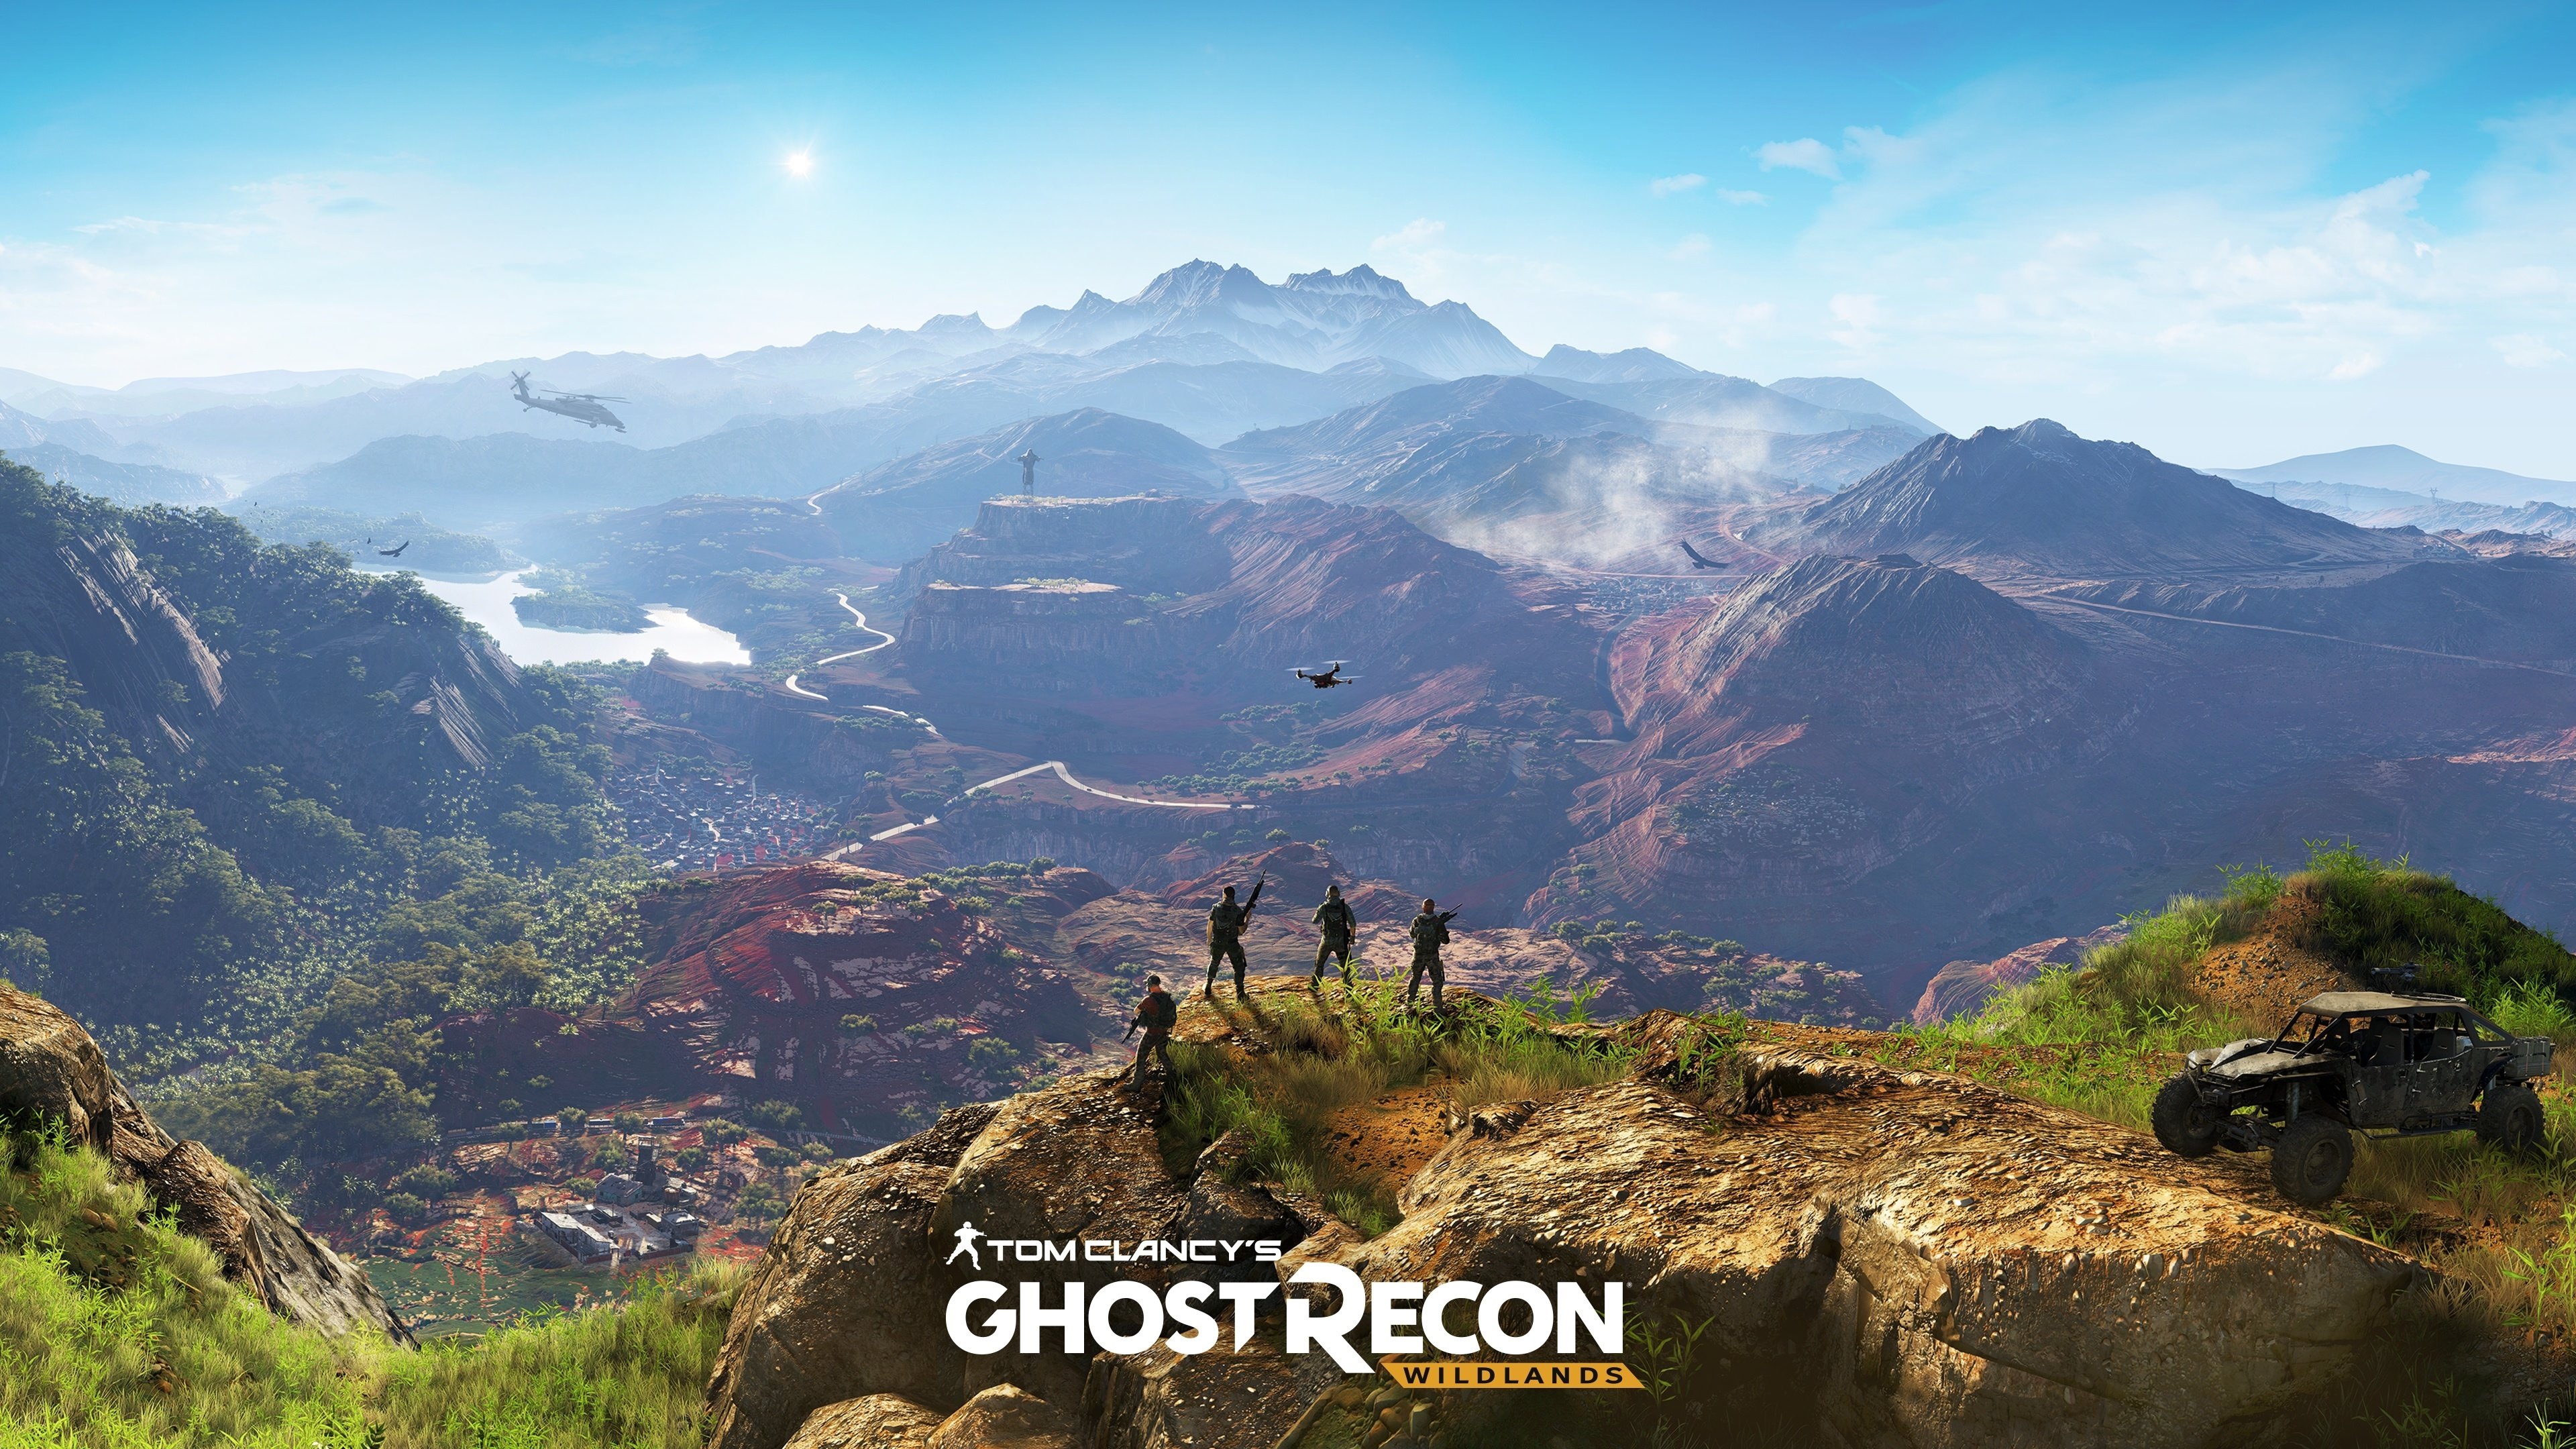 Tom clancys ghost recon wildlands hd papers and backgrounds